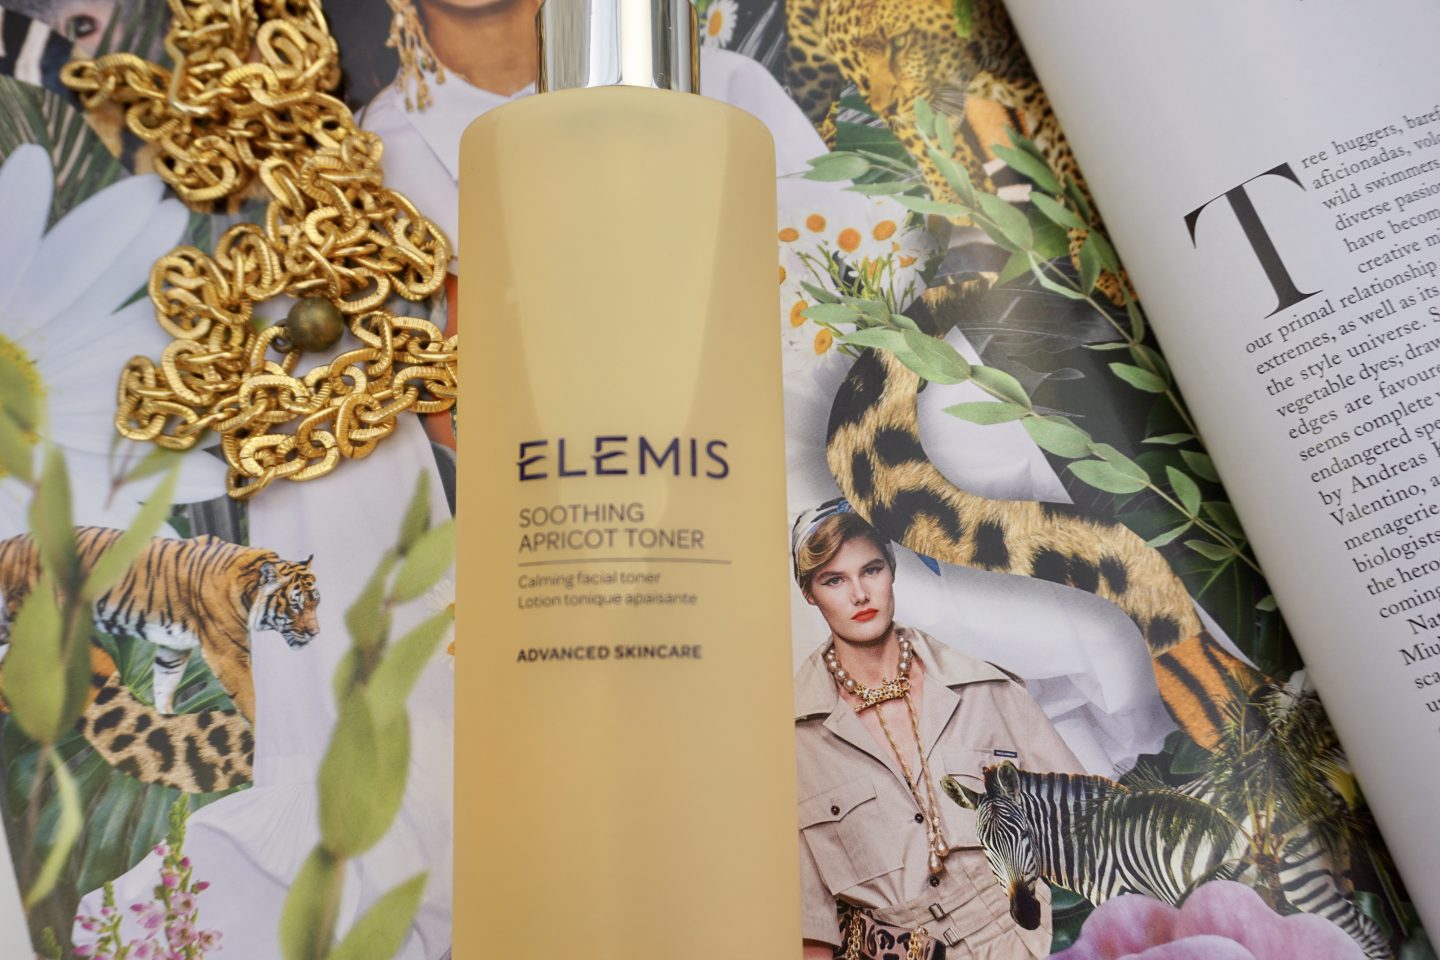 Today is the day for some @Elemis apricot toner!